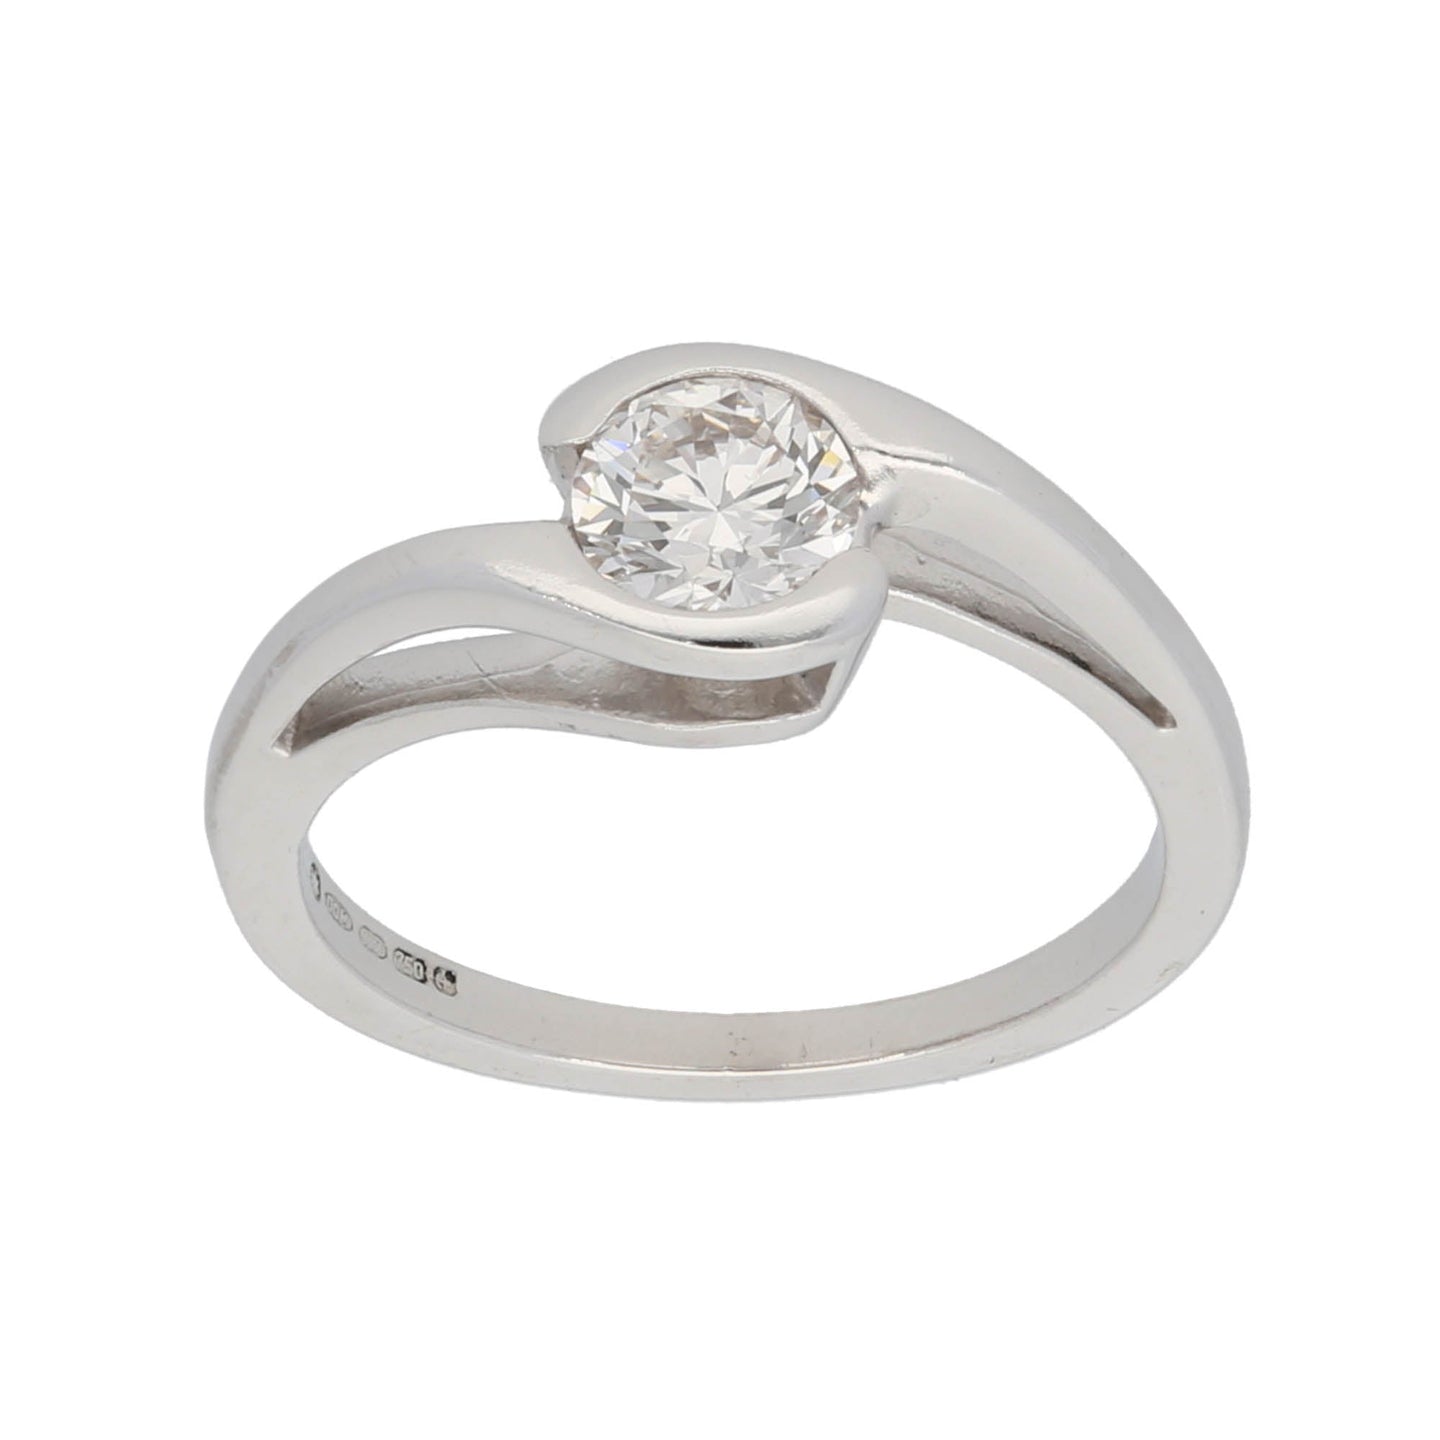 18ct White Gold 0.60ct Diamond Solitaire Ring Size K